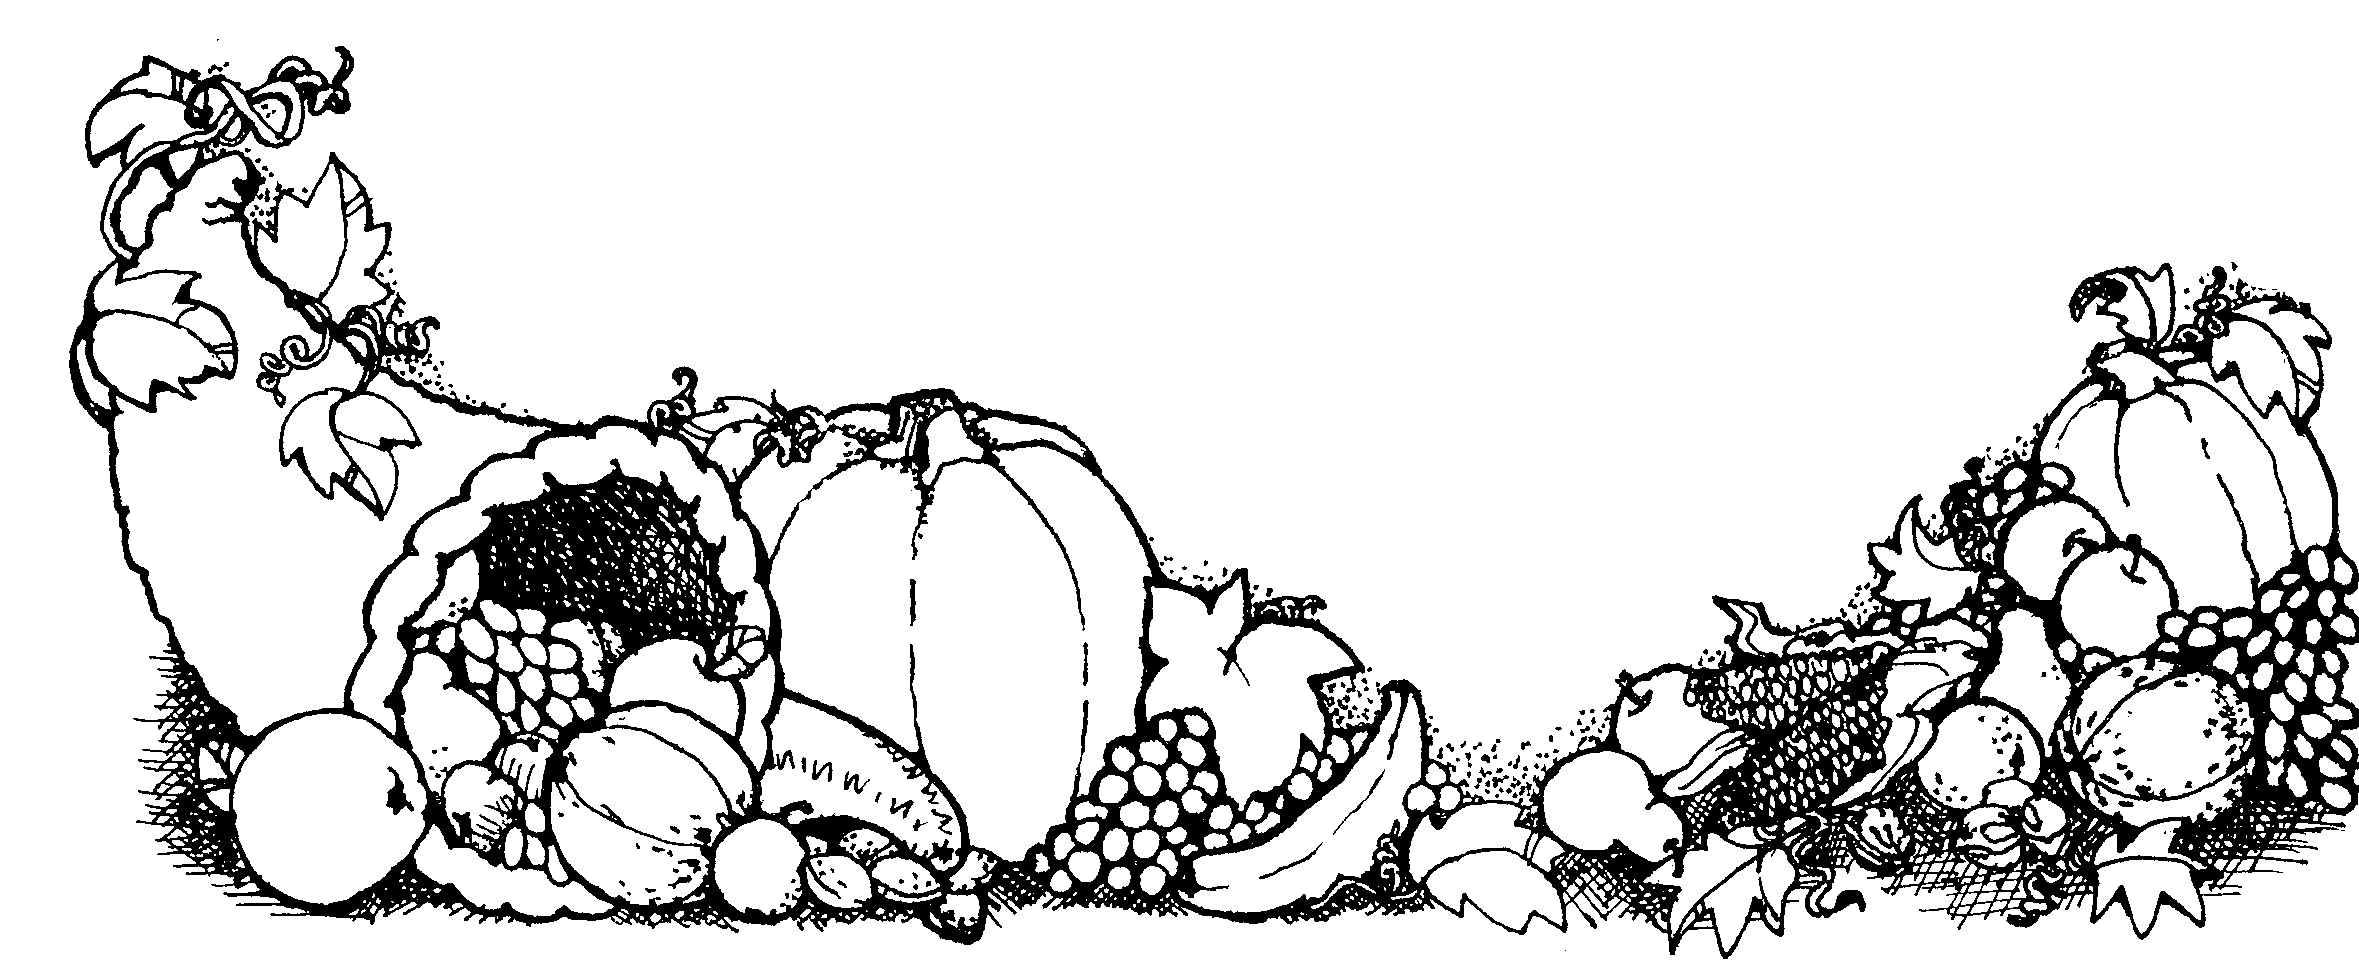 thanksgiving-clipart-black-and-white-free-20-free-cliparts-download